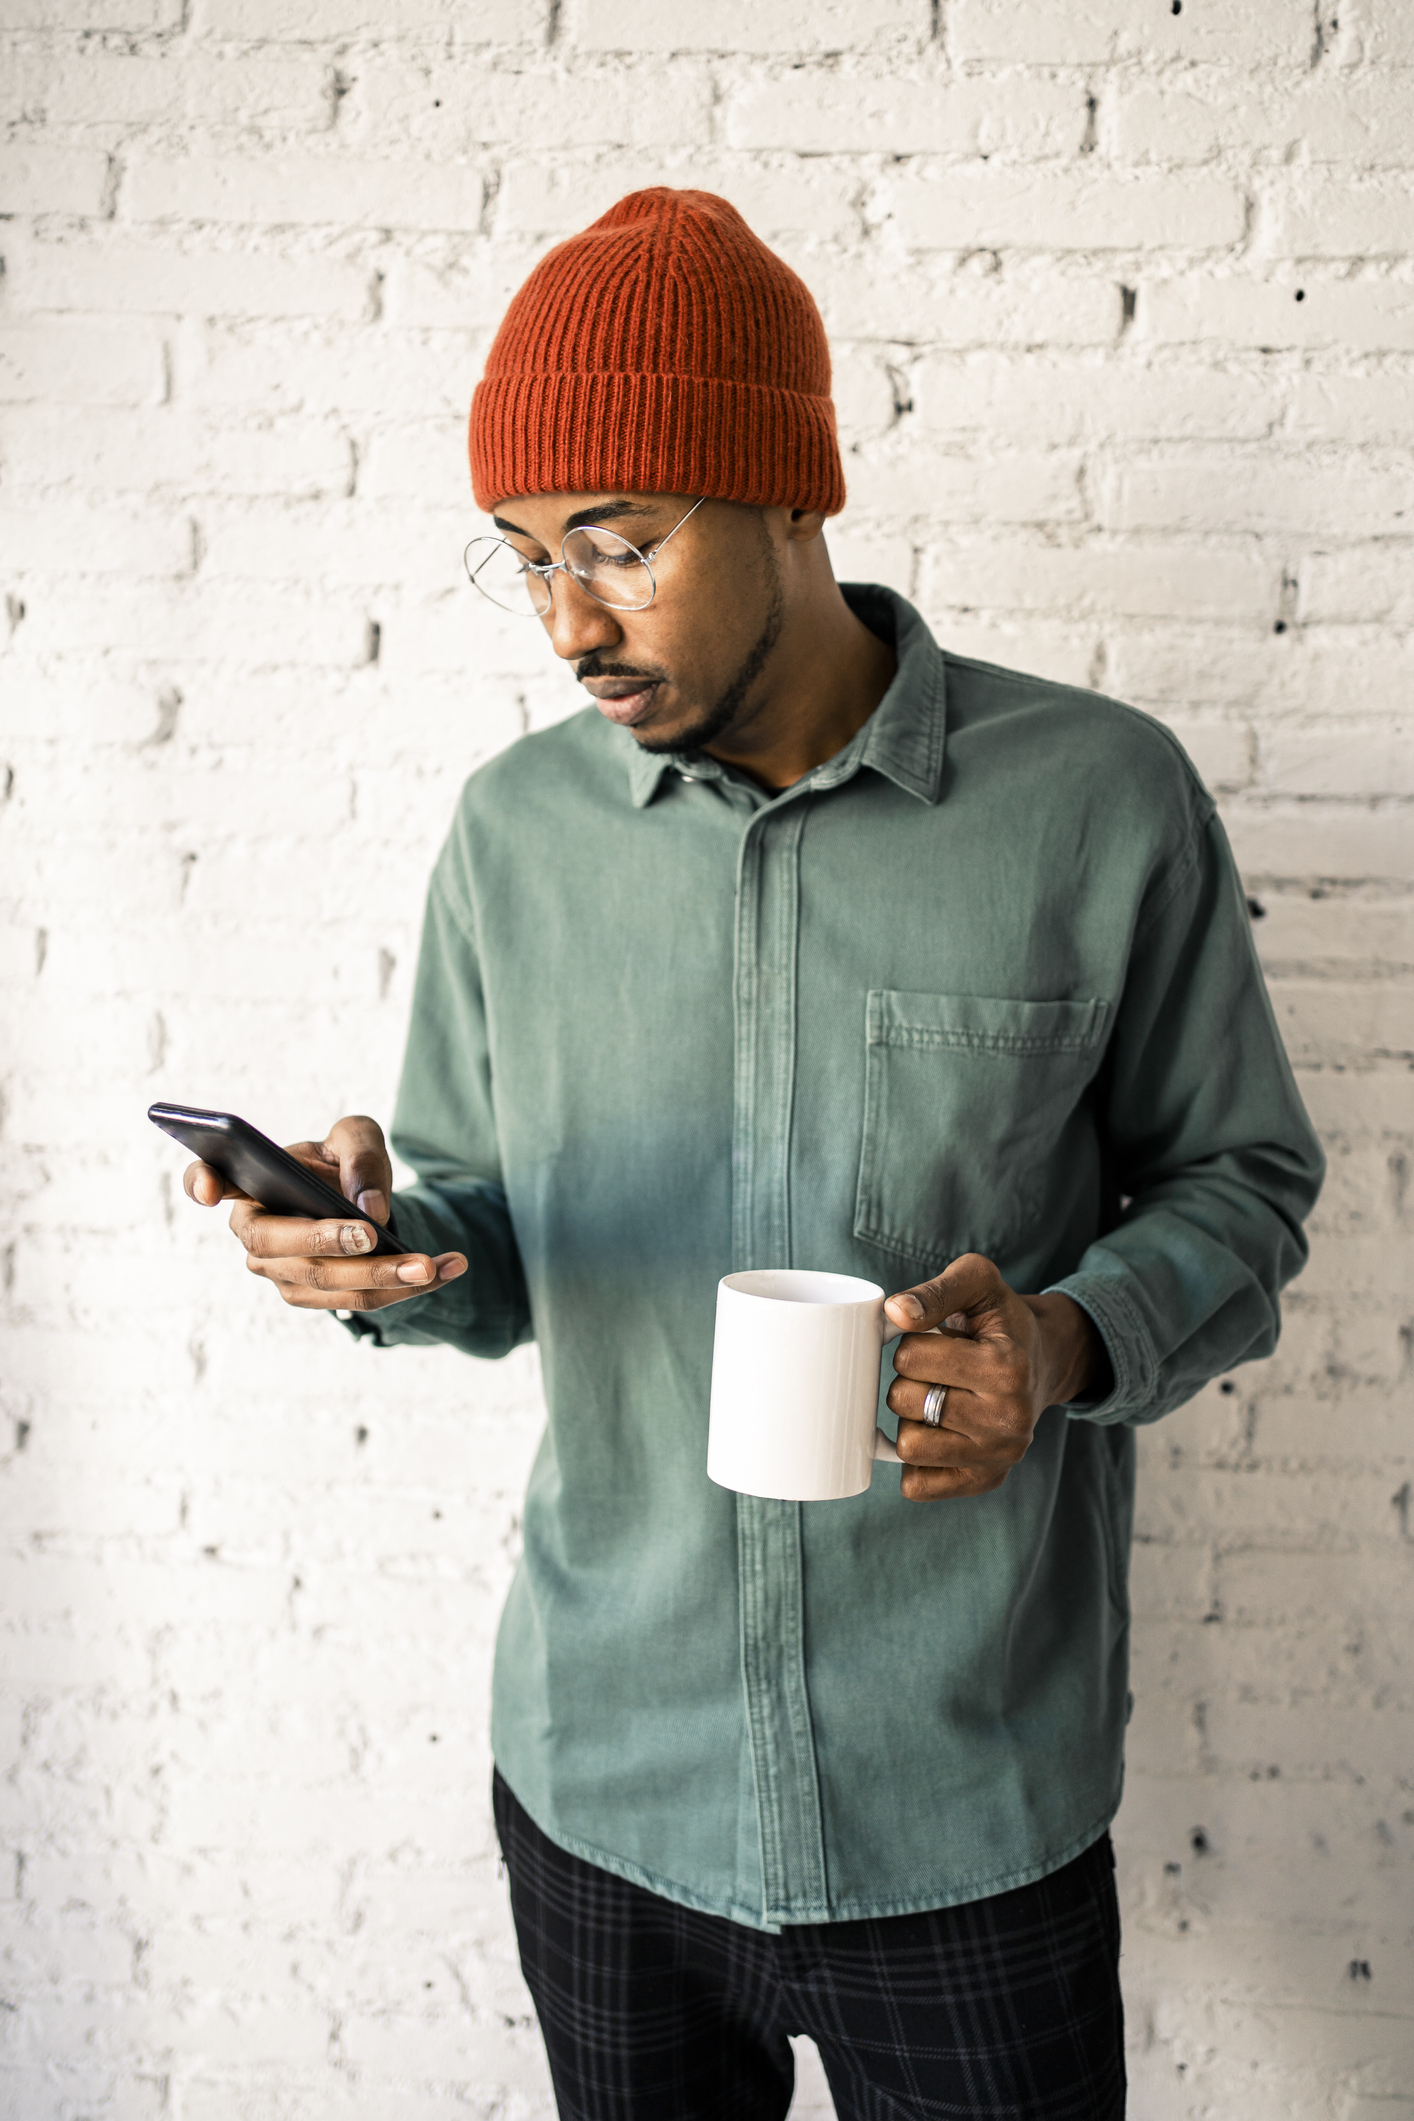 Mid adult man having coffee while using mobile phone against white brick wall